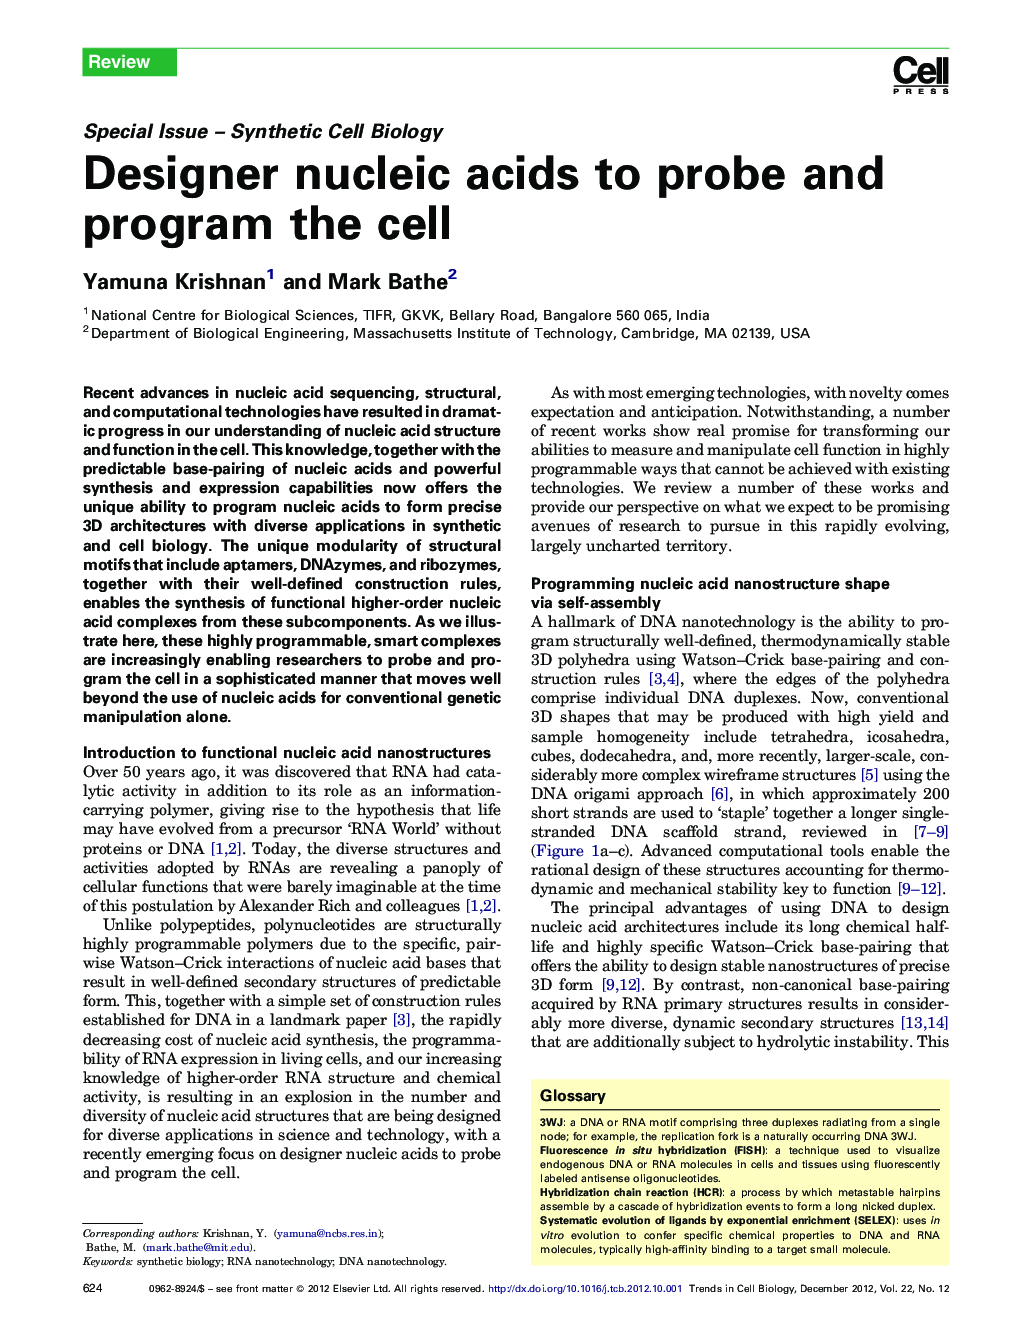 Designer nucleic acids to probe and program the cell